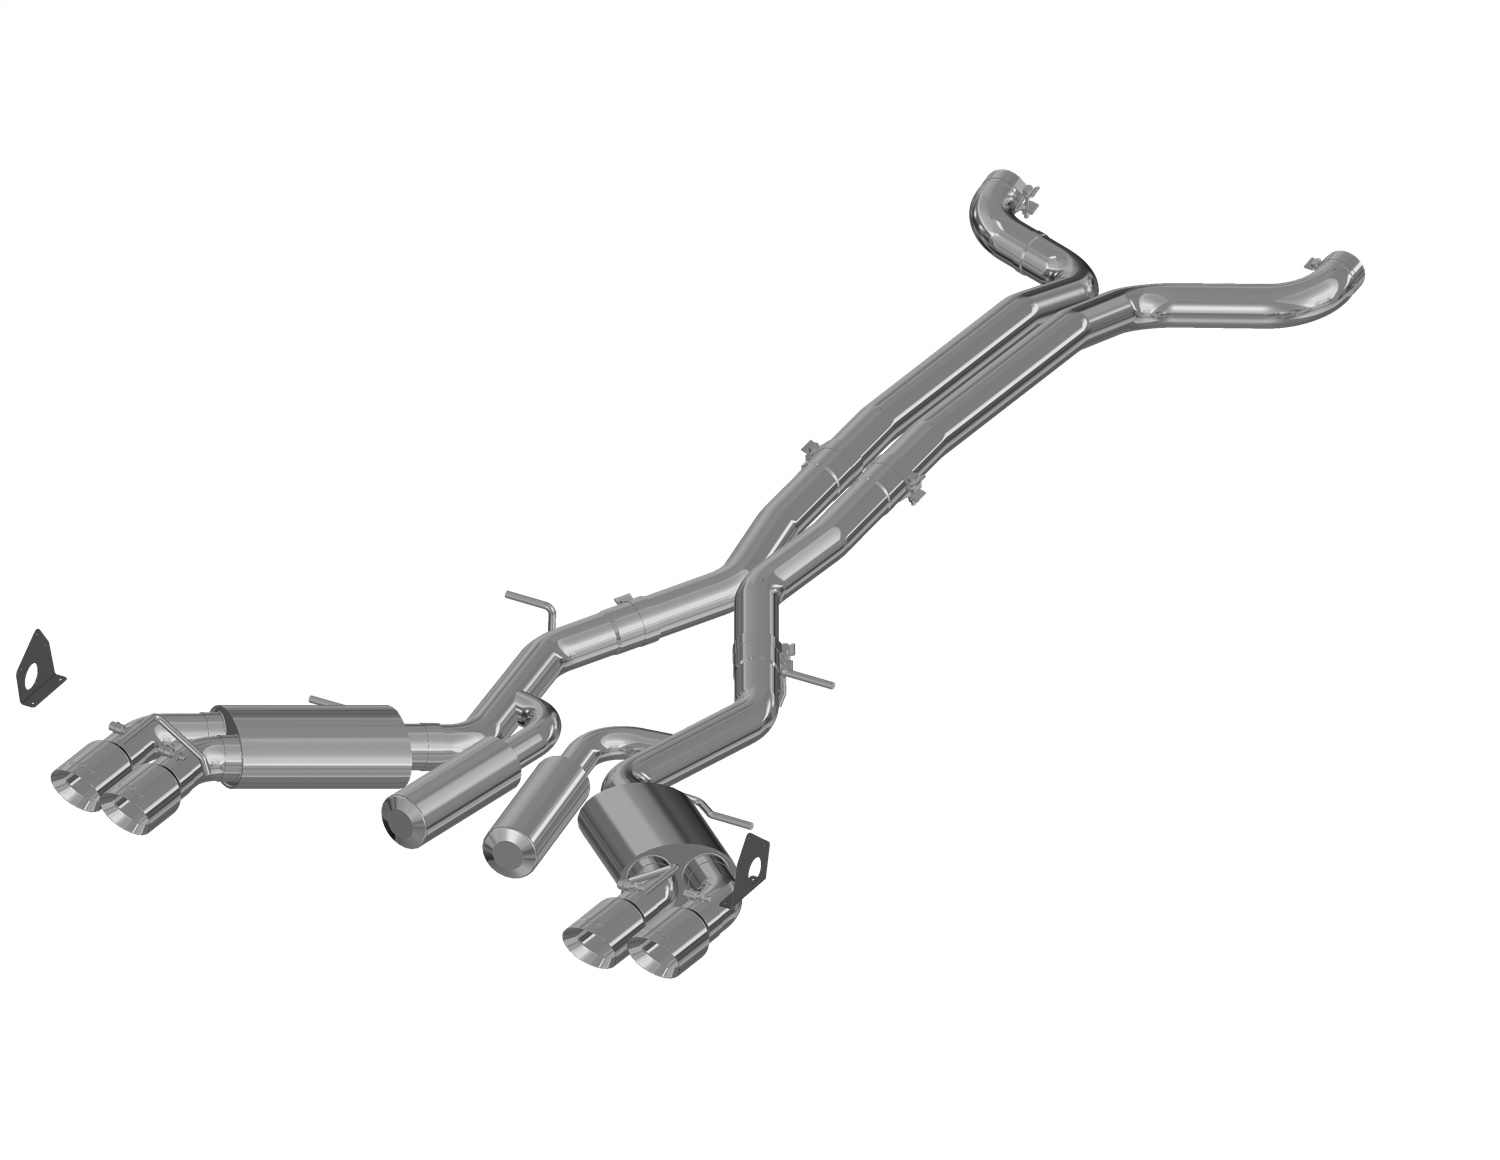 MBRP Exhaust S7032409 Armor Plus Cat Back Exhaust System Fits 16-23 Camaro